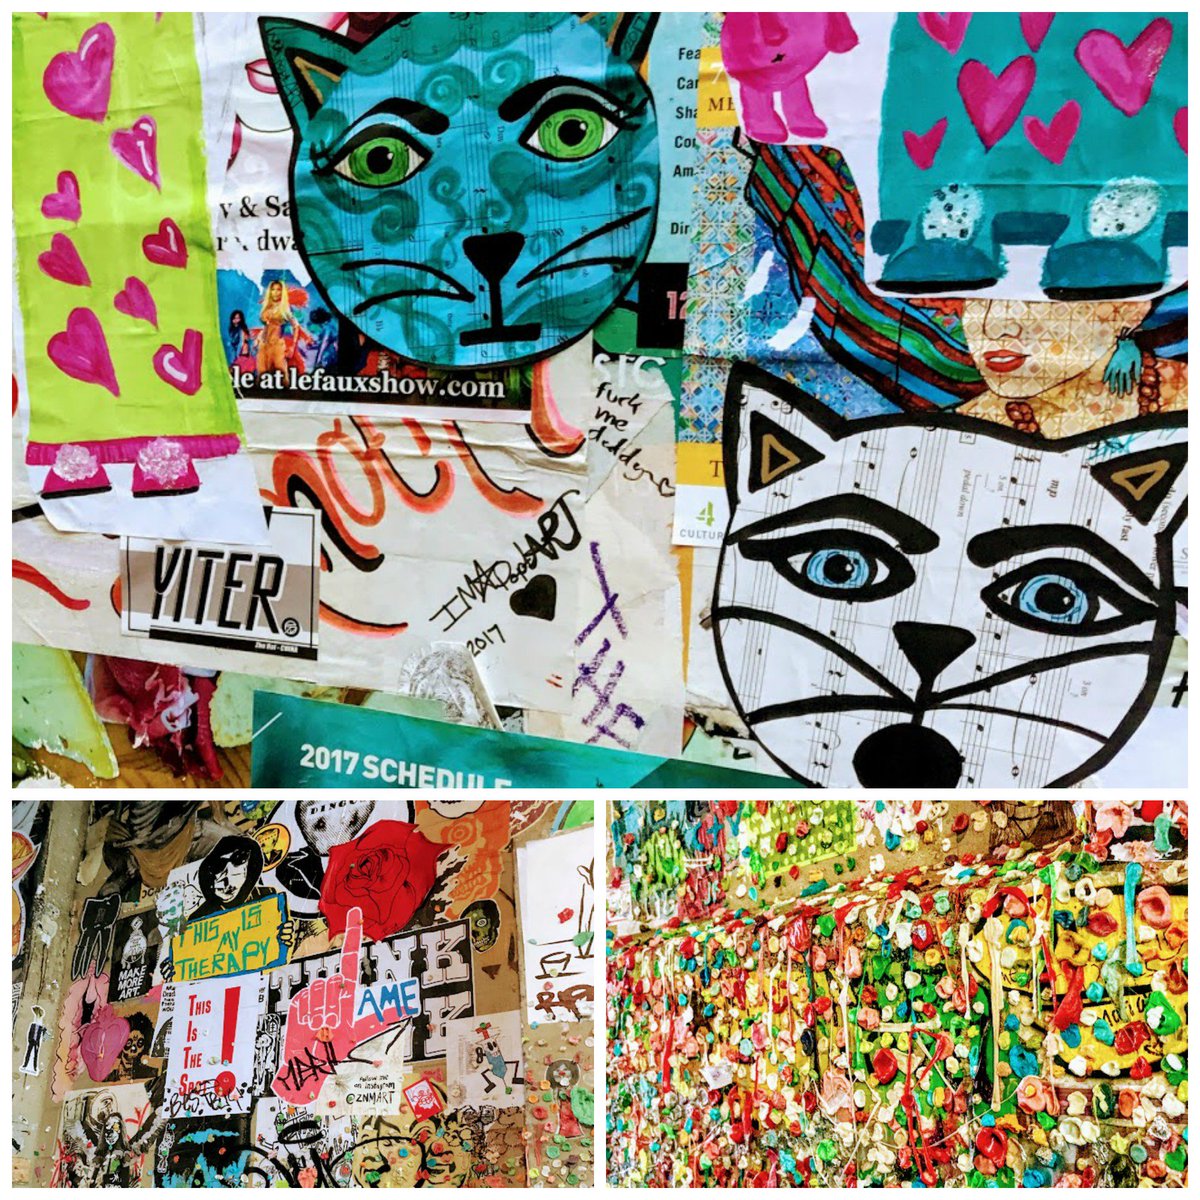 A3: I took this in bubblegum alley in #Seattle #VisitWashington - The entire wall was very colorful and feautured a few #cats as well! #StreetArtChat @StreetArtChat @RoarLoudTravel @NothingButNE